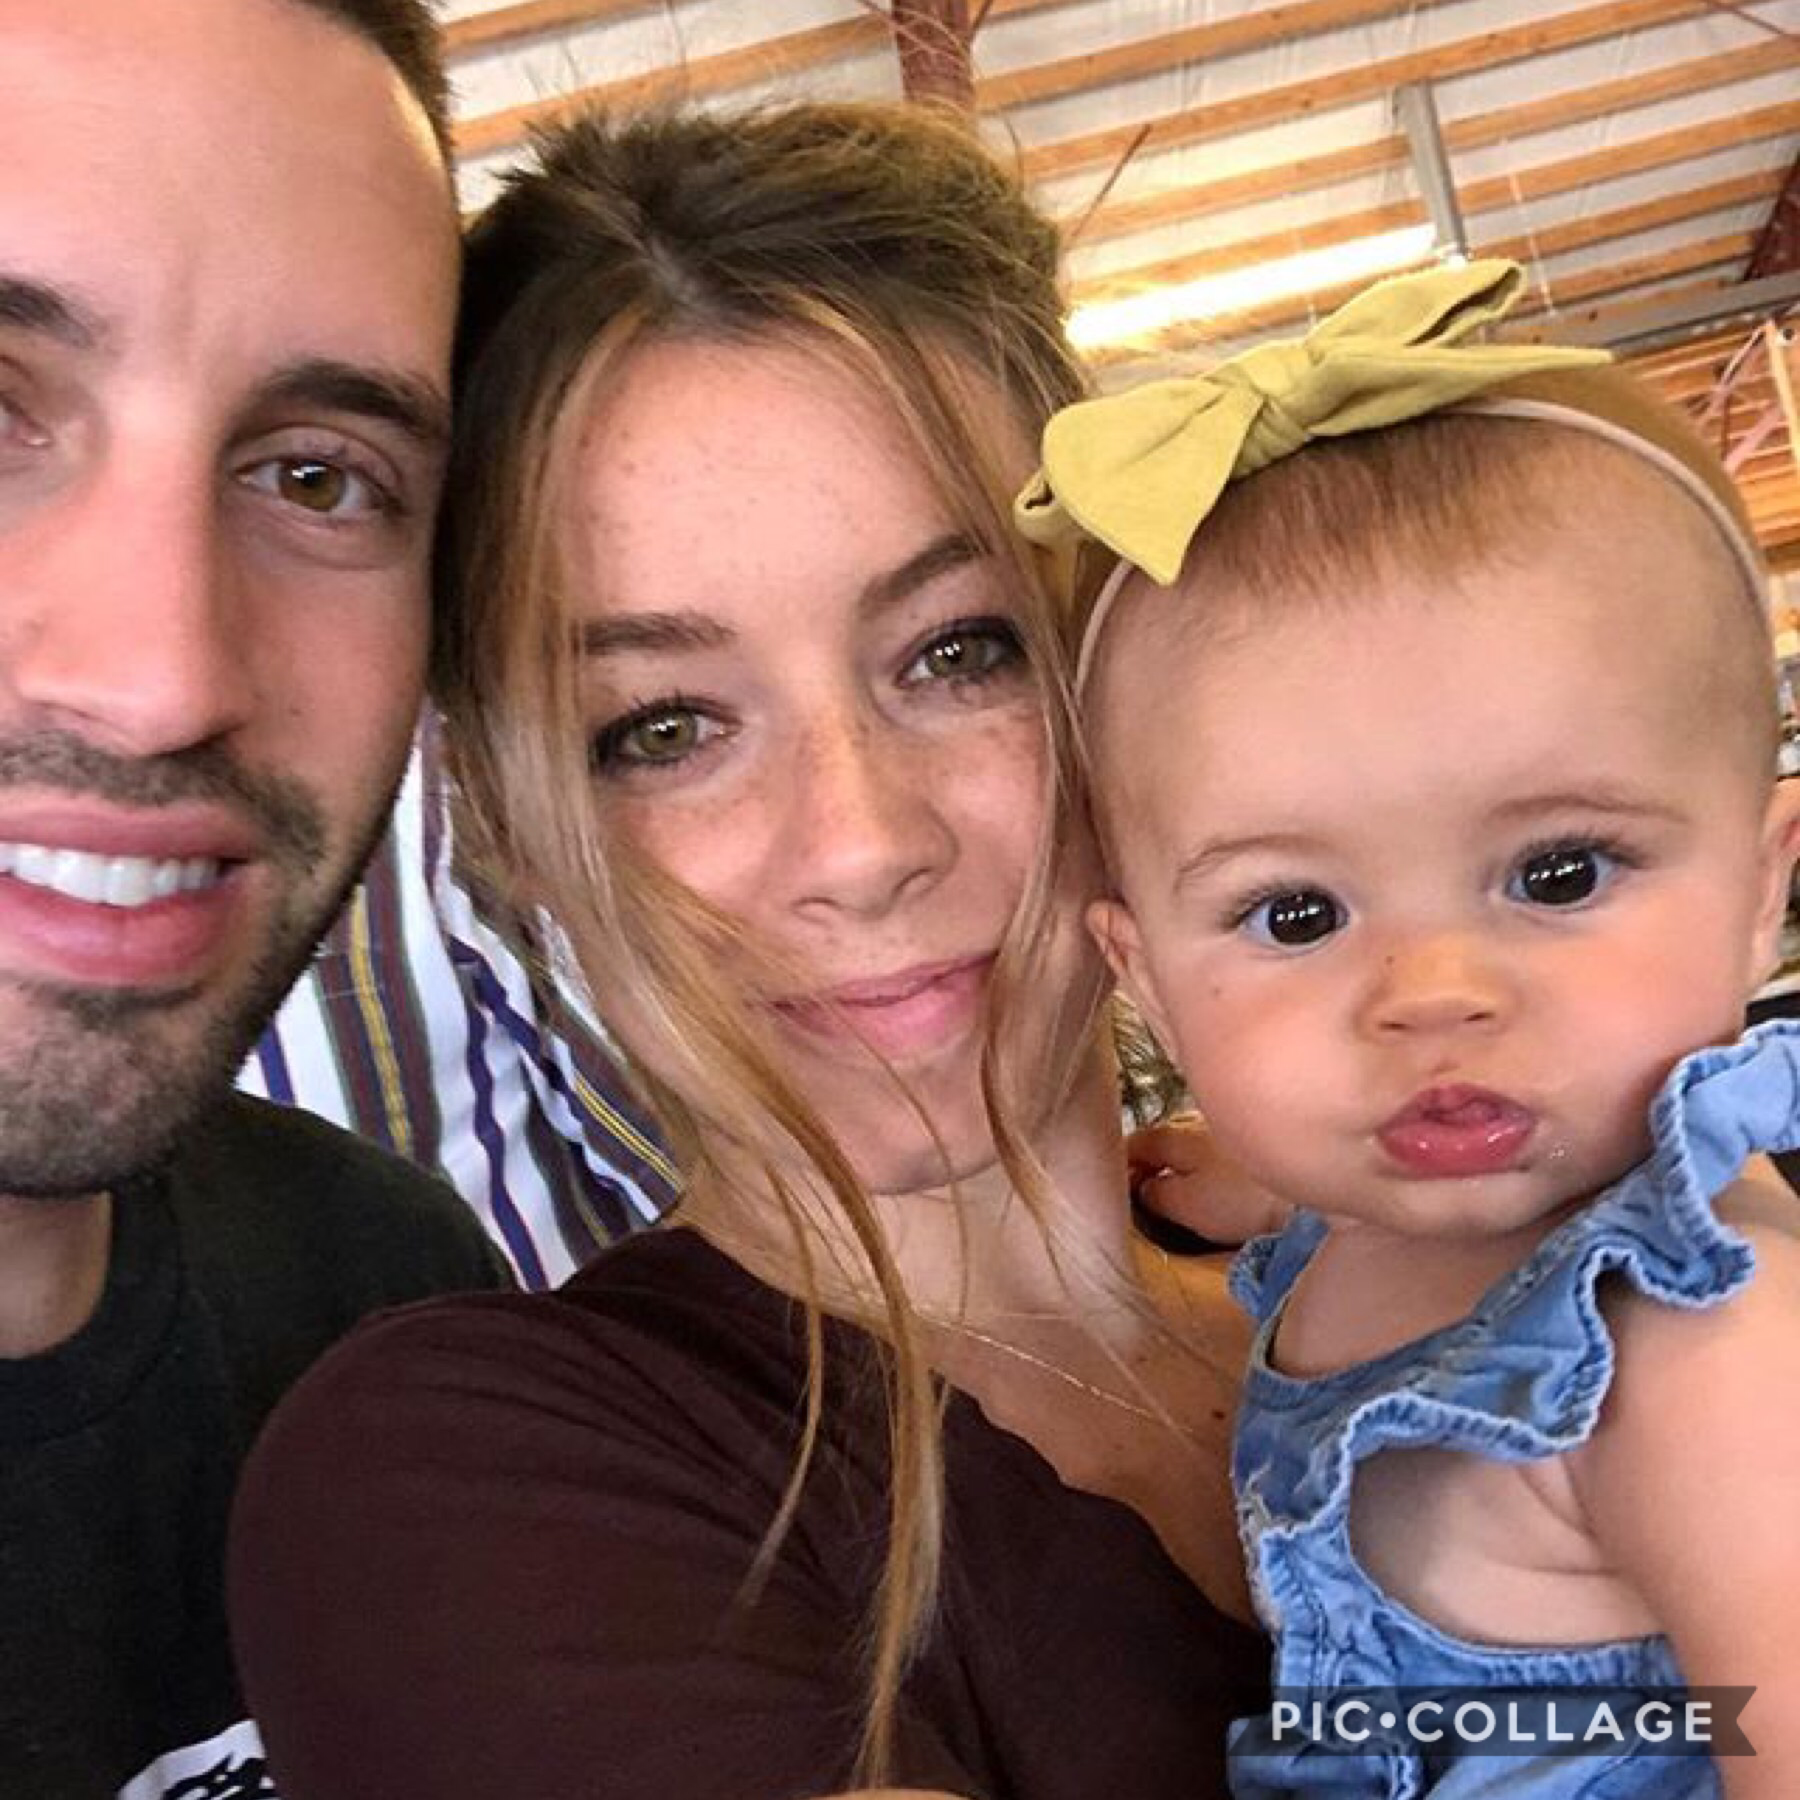 to be suuuuuper honest i am so so jealous of tatum and zack’s life lol i swear they have the picture perfect life. like if i didn’t want to be a musician i would want to be a stay at home mom and travel like Tatum and Zack do and omg Pepper is the cutest 